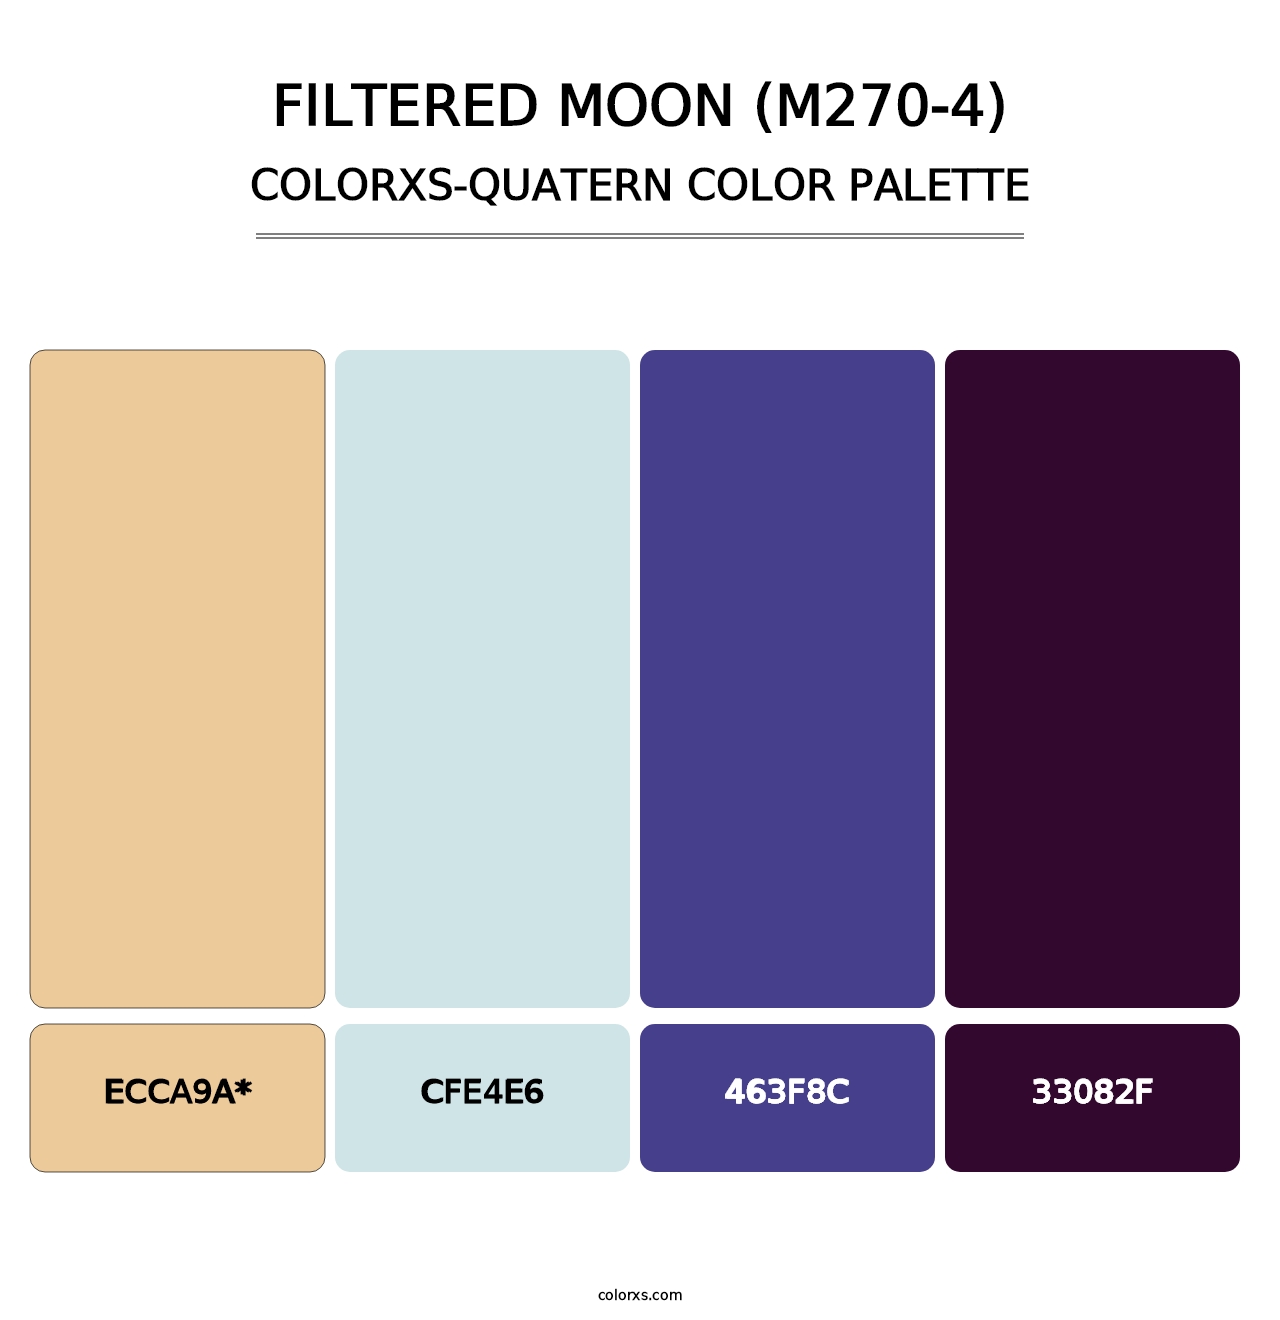 Filtered Moon (M270-4) - Colorxs Quatern Palette